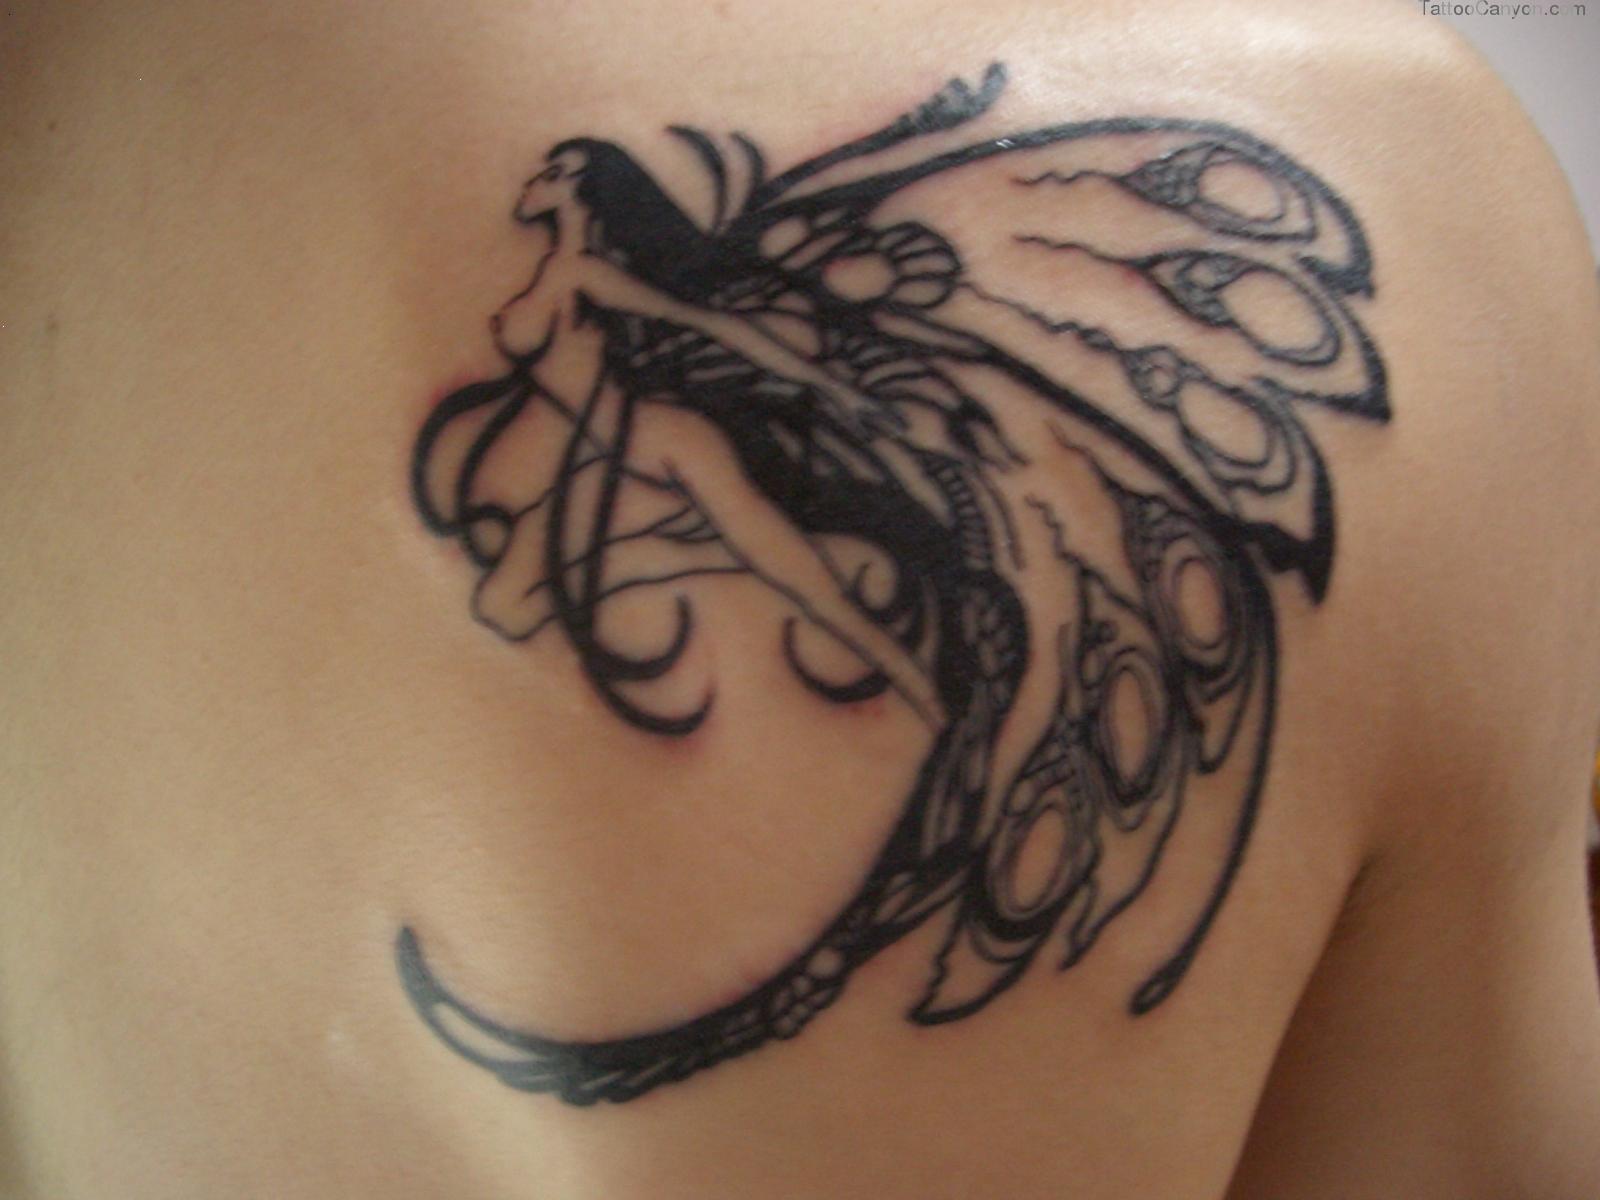 Black Ink Fairy With Half Moon Tattoo On Right Back Shoulder